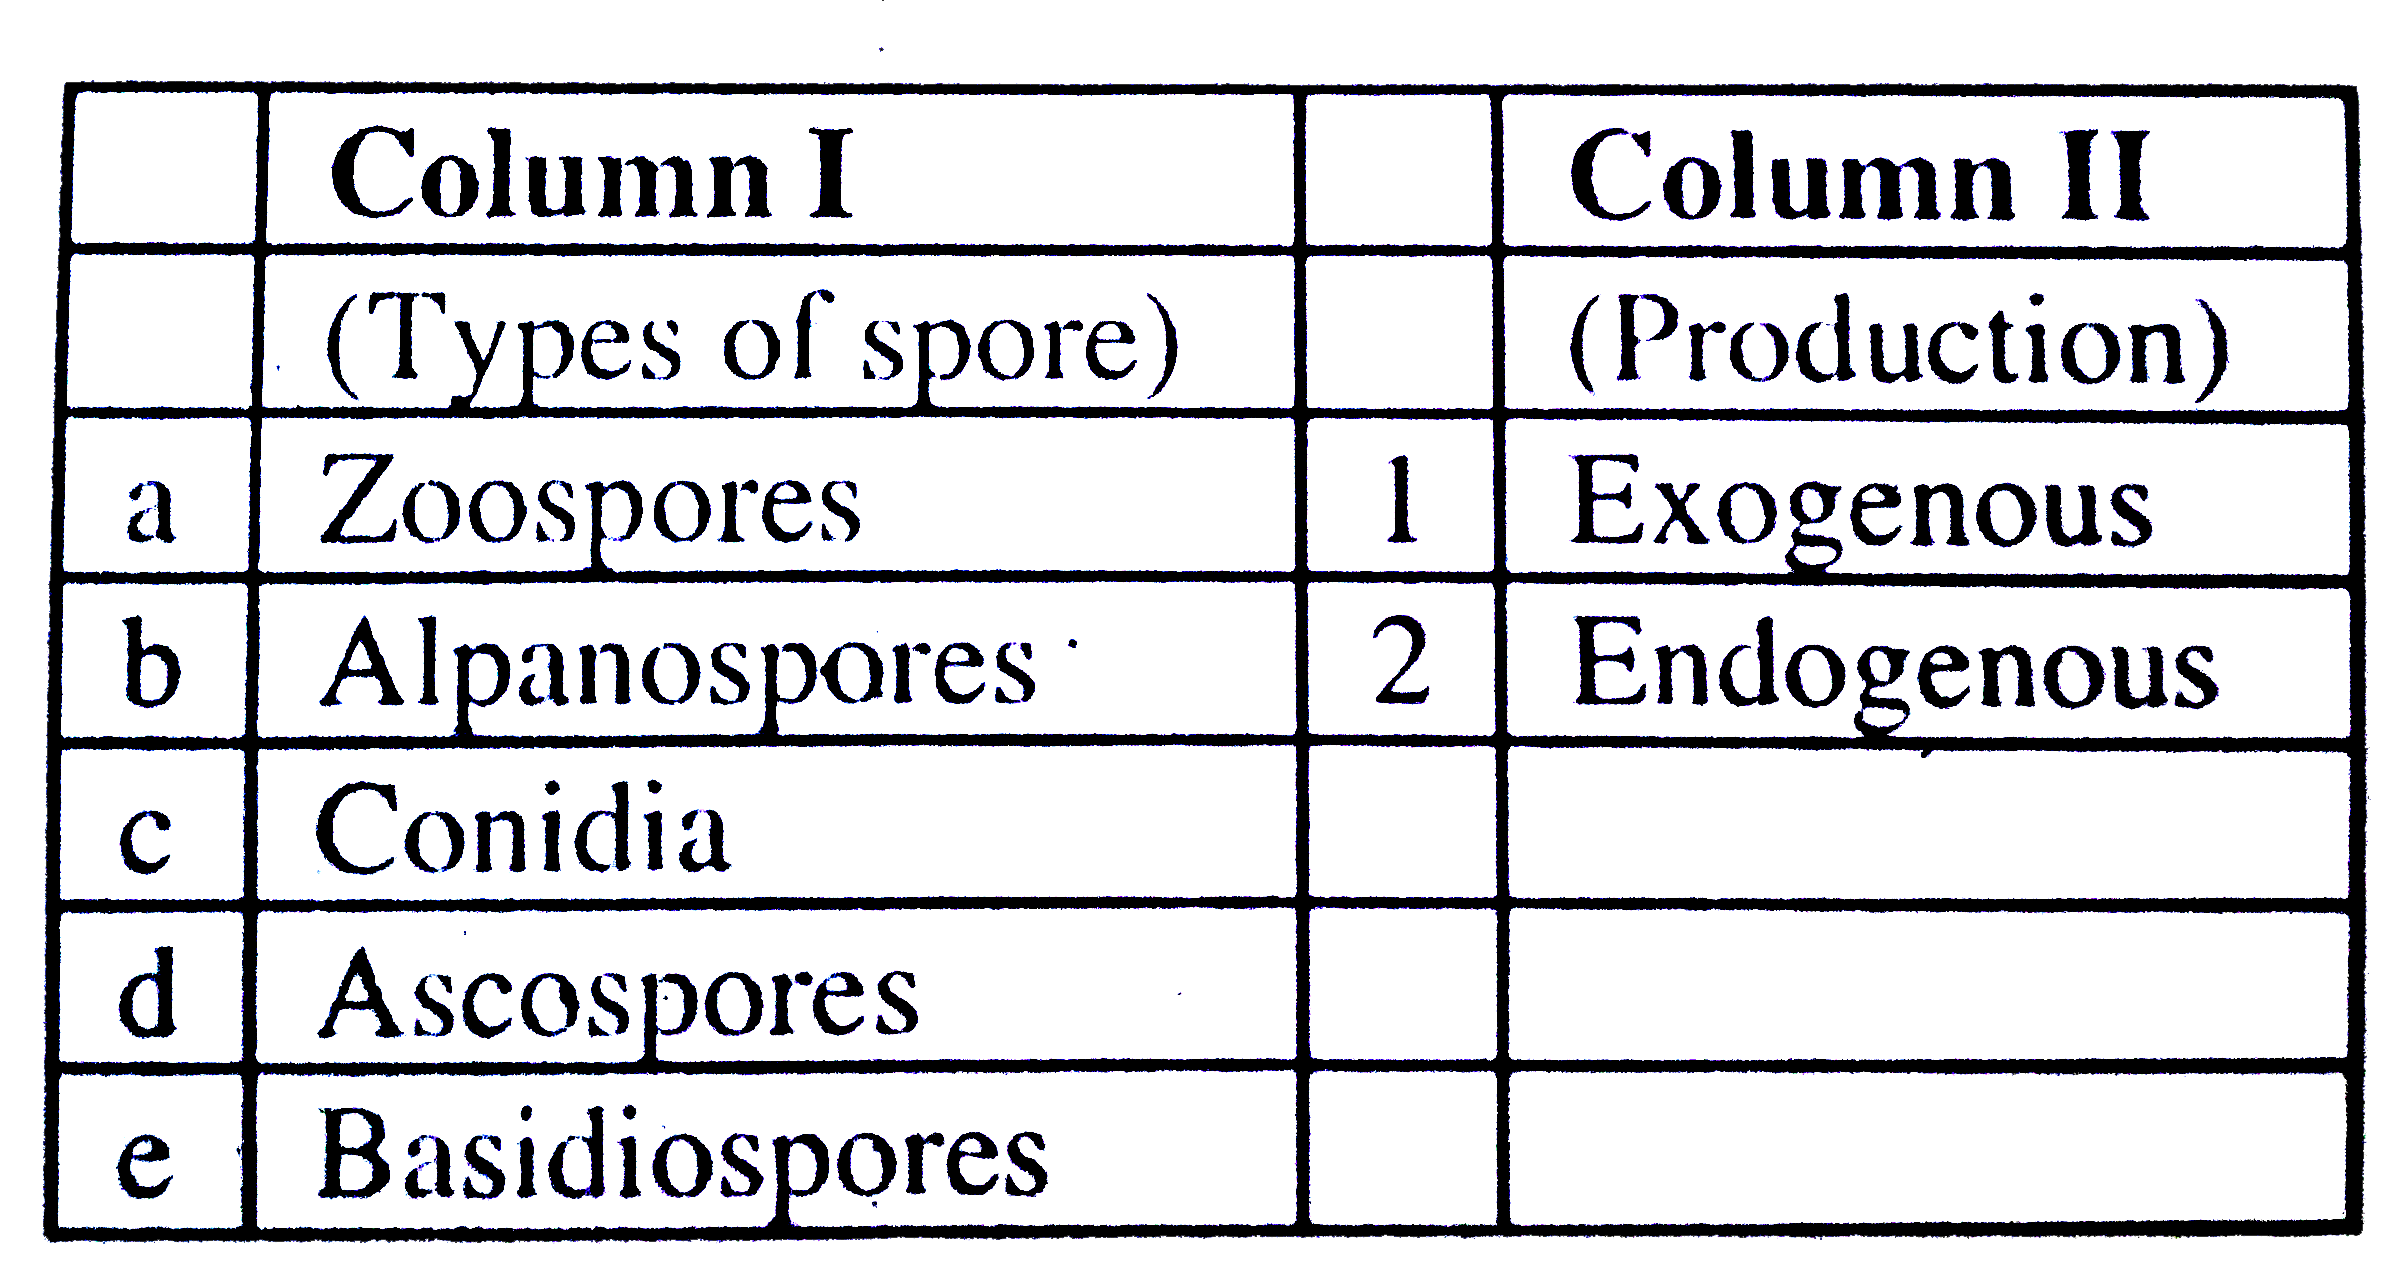 Match the columns I and II, and choose the correct combination from the options given :-